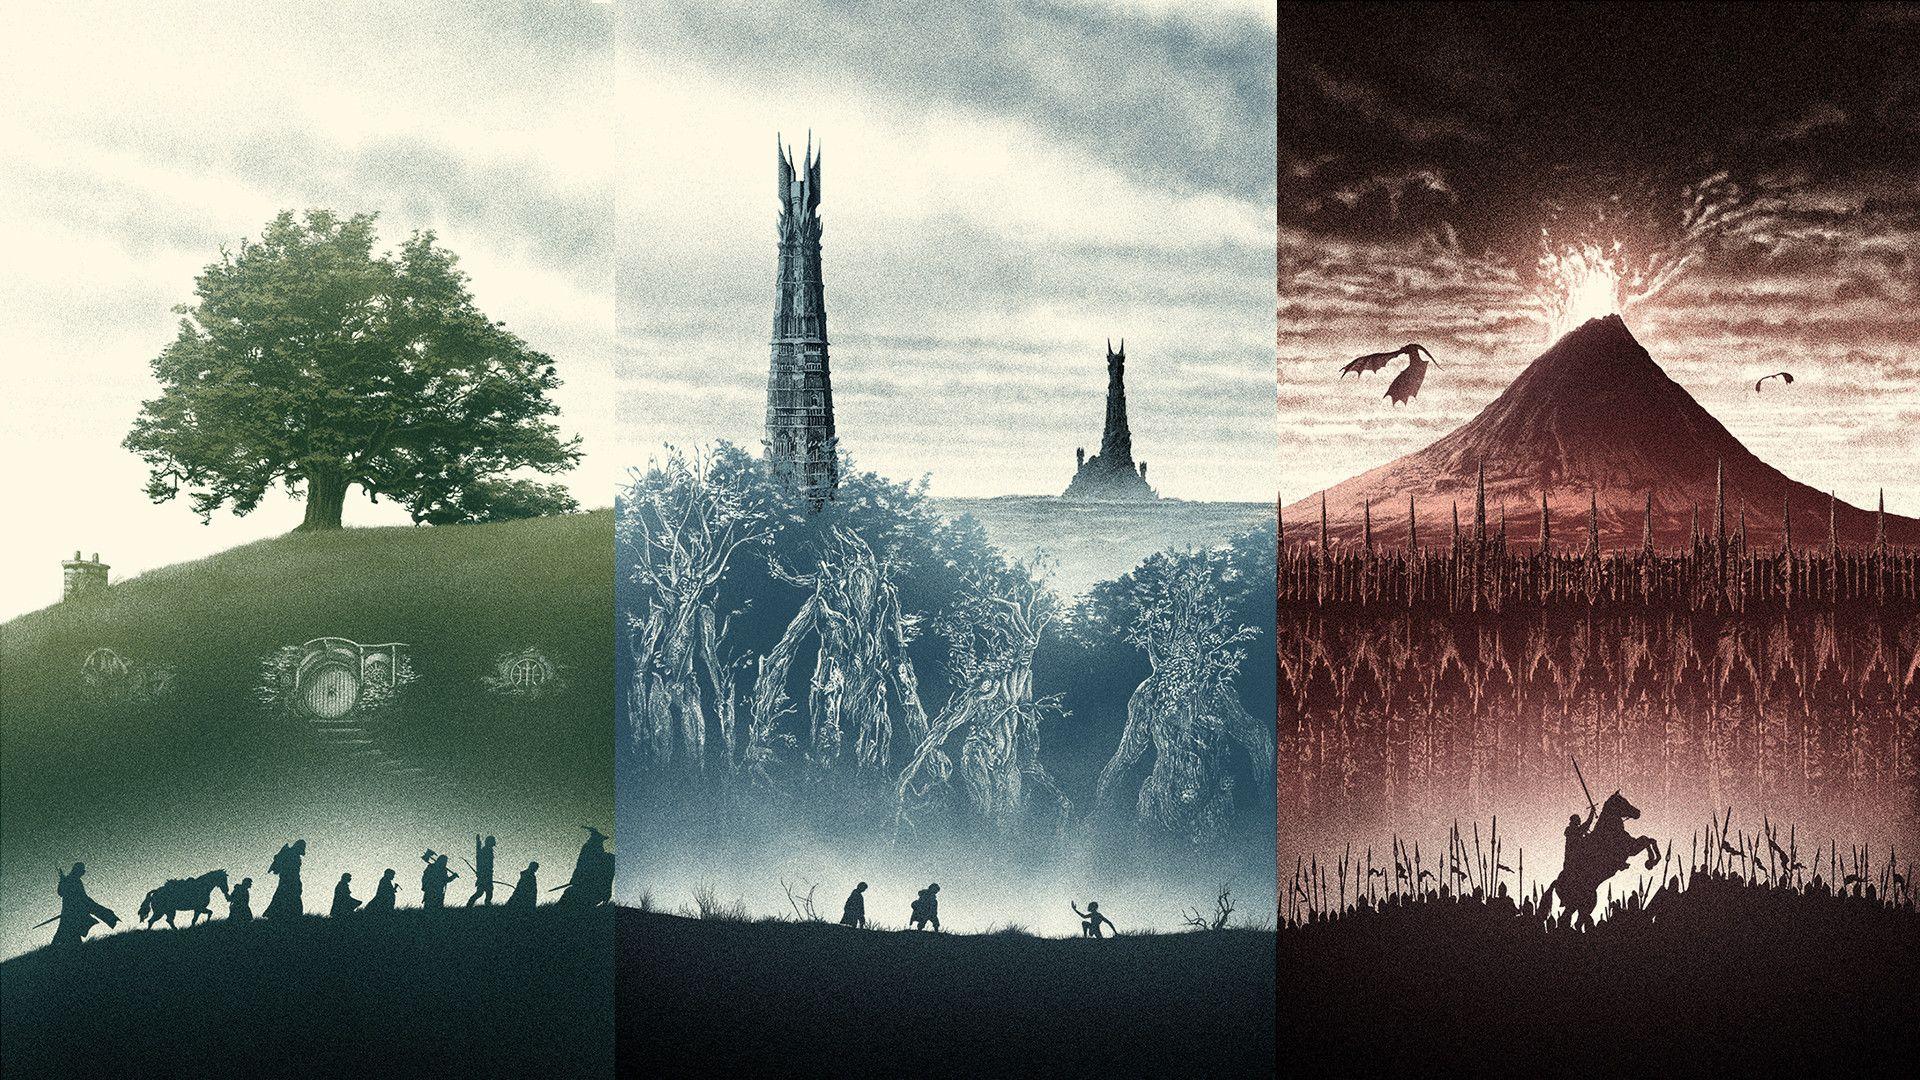 Lord of the Rings wallpaper, by Marko Manev [1920x1080]